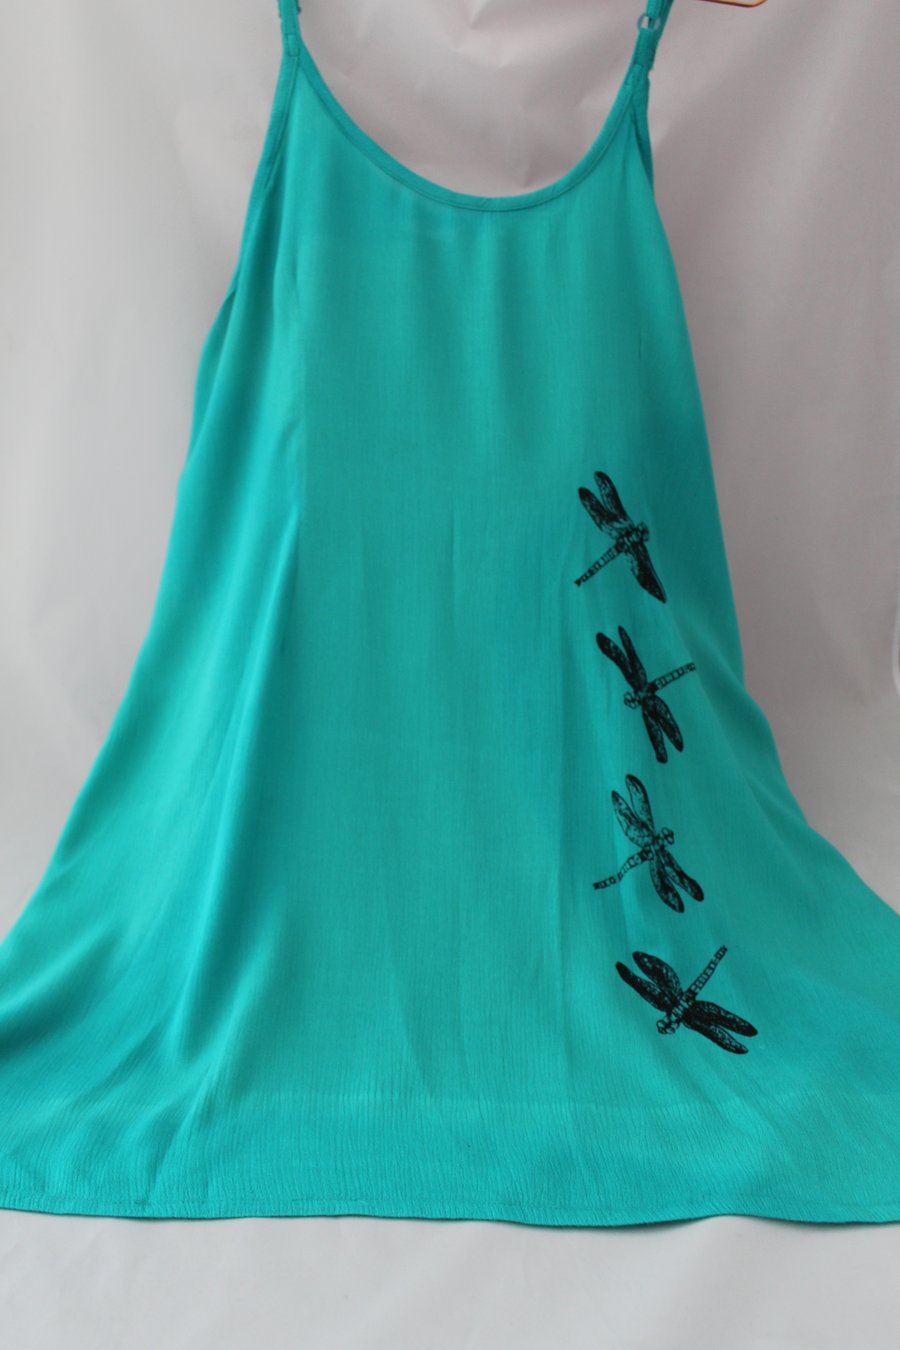 Vintage 90's Ladies green strappy dragonfly handprint dress,re worked sun dress